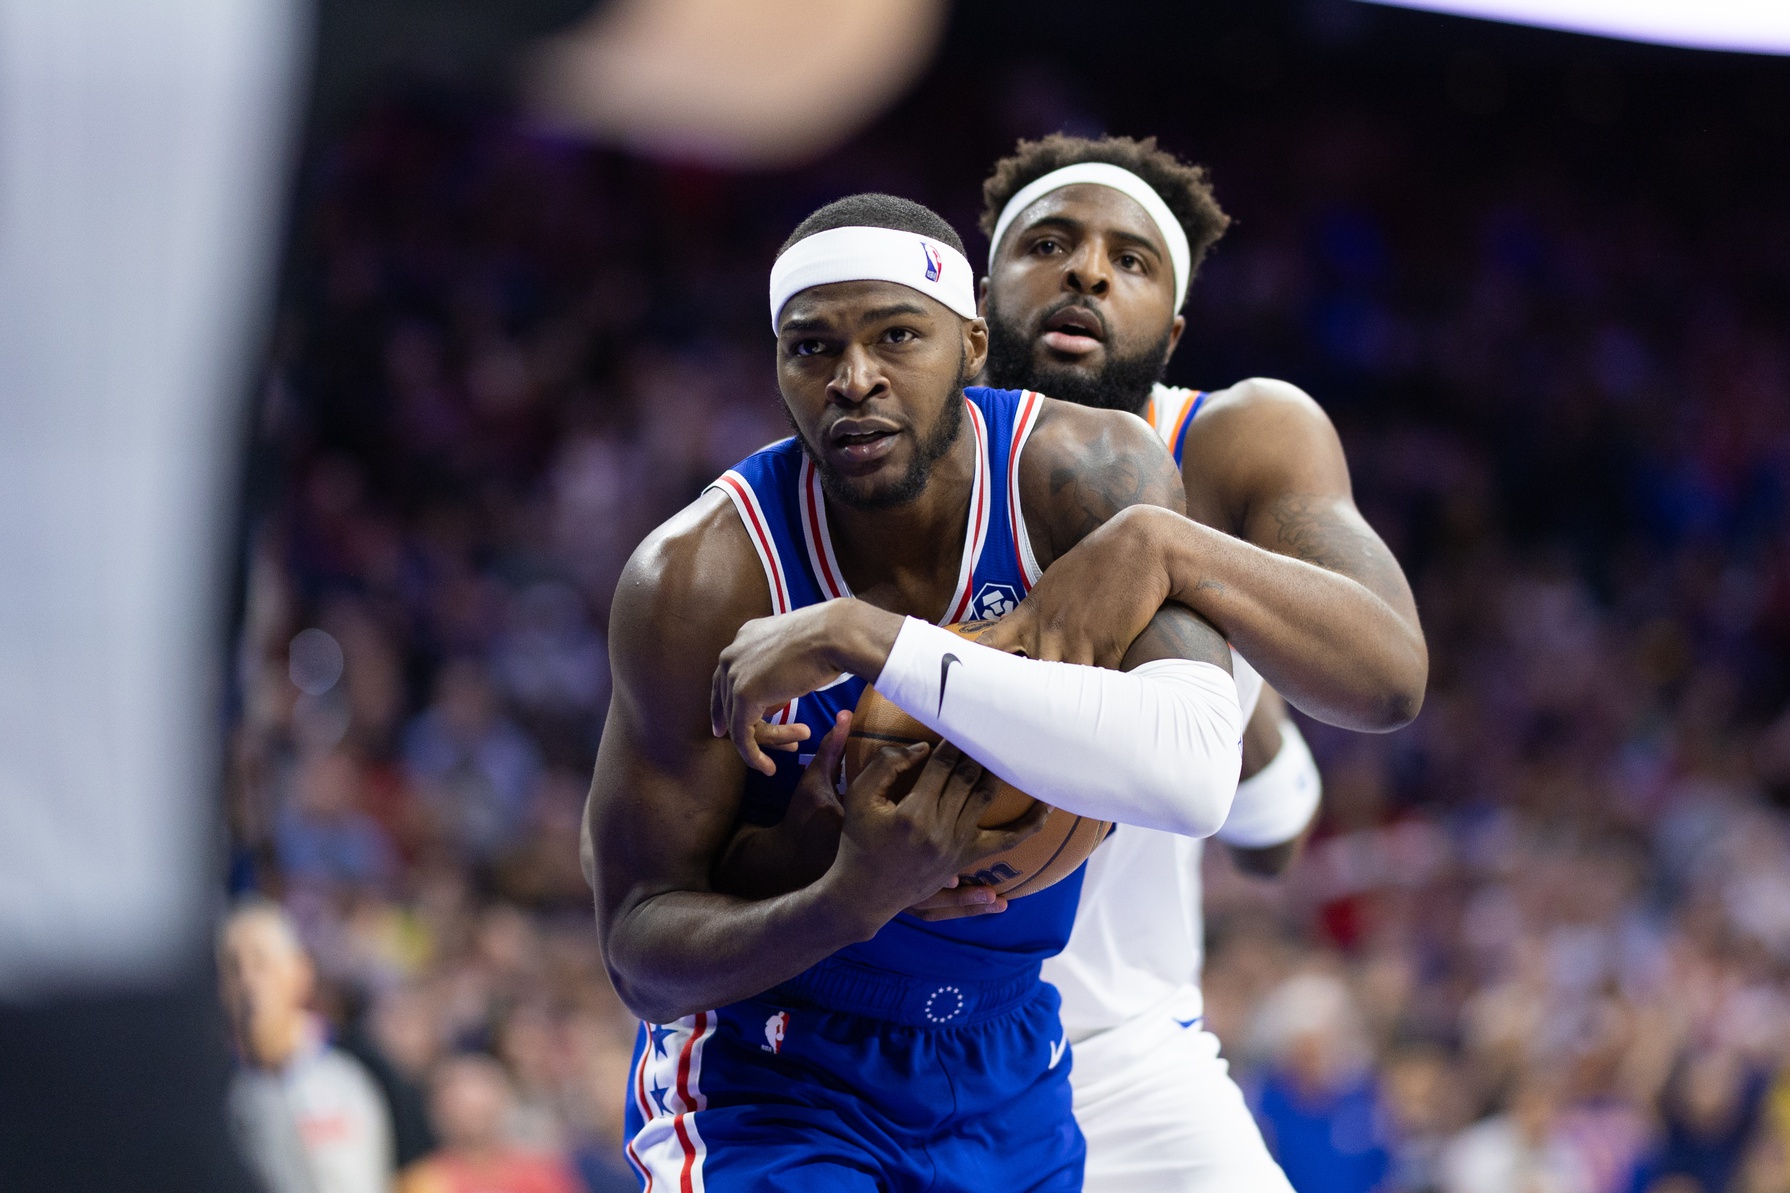 New York Knicks center Mitchell Robinson and Detroit Pistons center Paul Reed